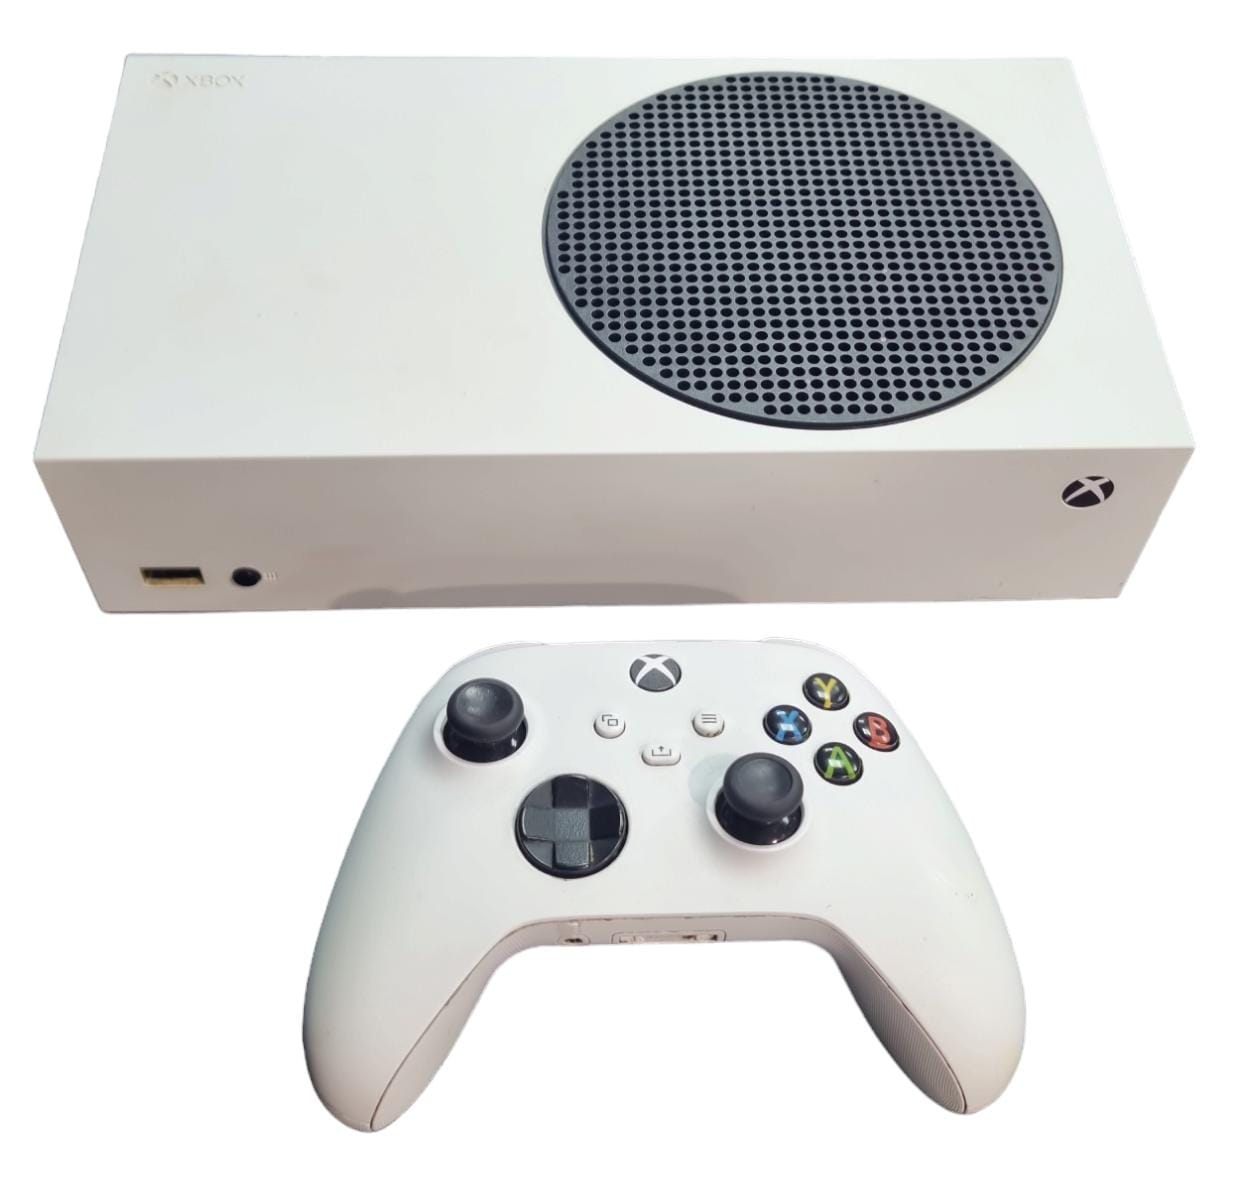 Microsoft Xbox Series S - All Digital Console - 512GB SSD - White - with controller and cables - No Box